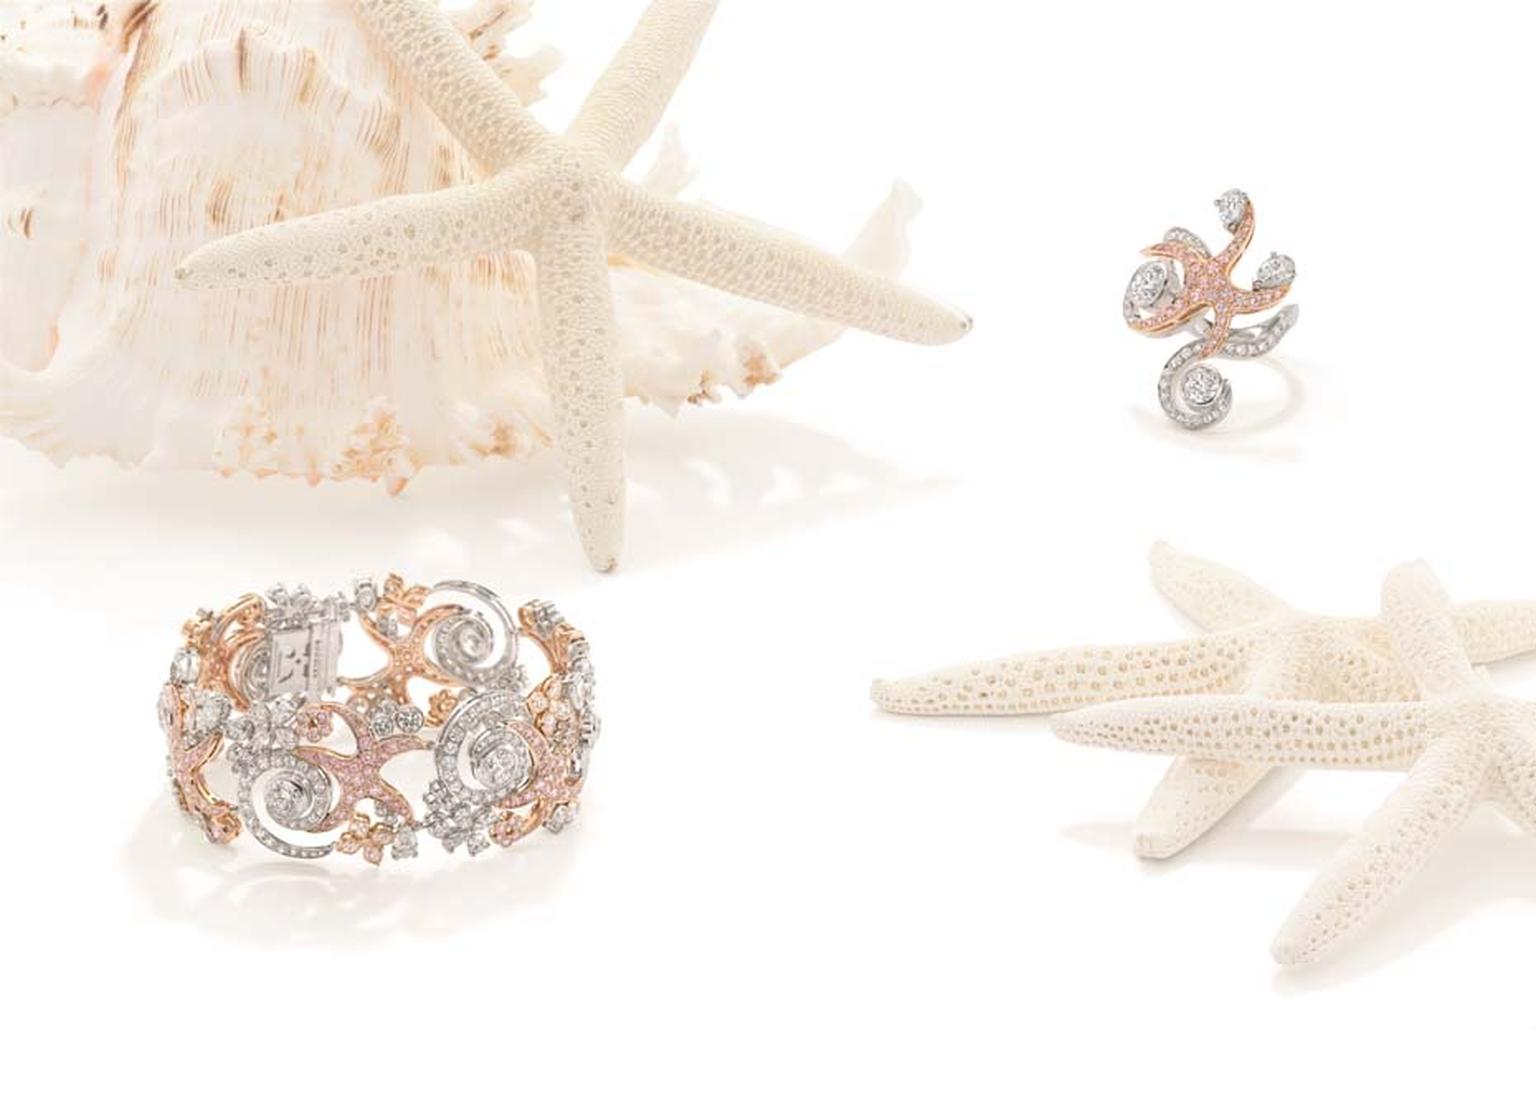 Boodles Sea Star bracelet and ring with white and pink diamonds, from the new 'Ocean of Dreams' collection.